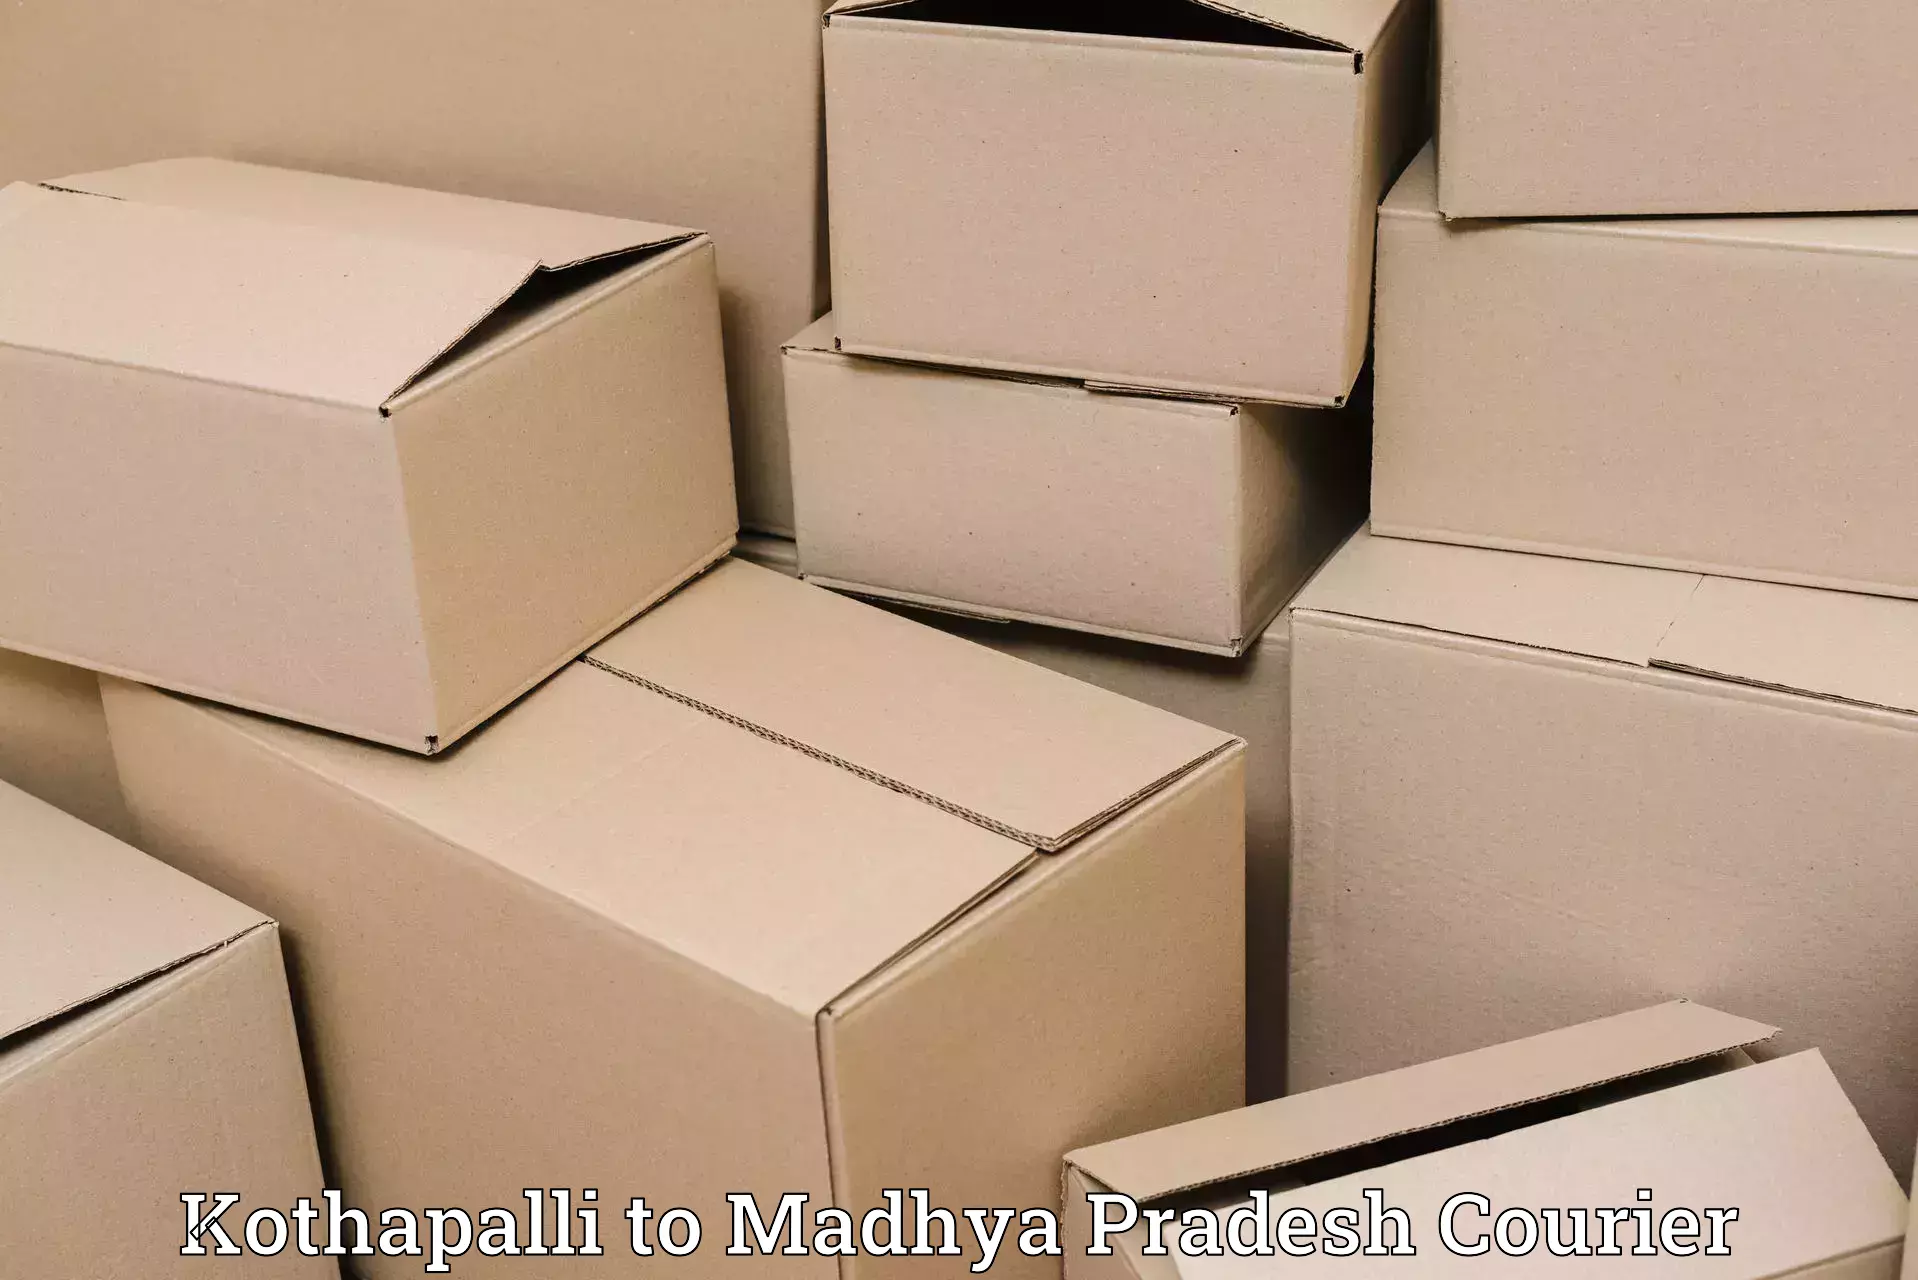 Efficient package consolidation in Kothapalli to Madhya Pradesh